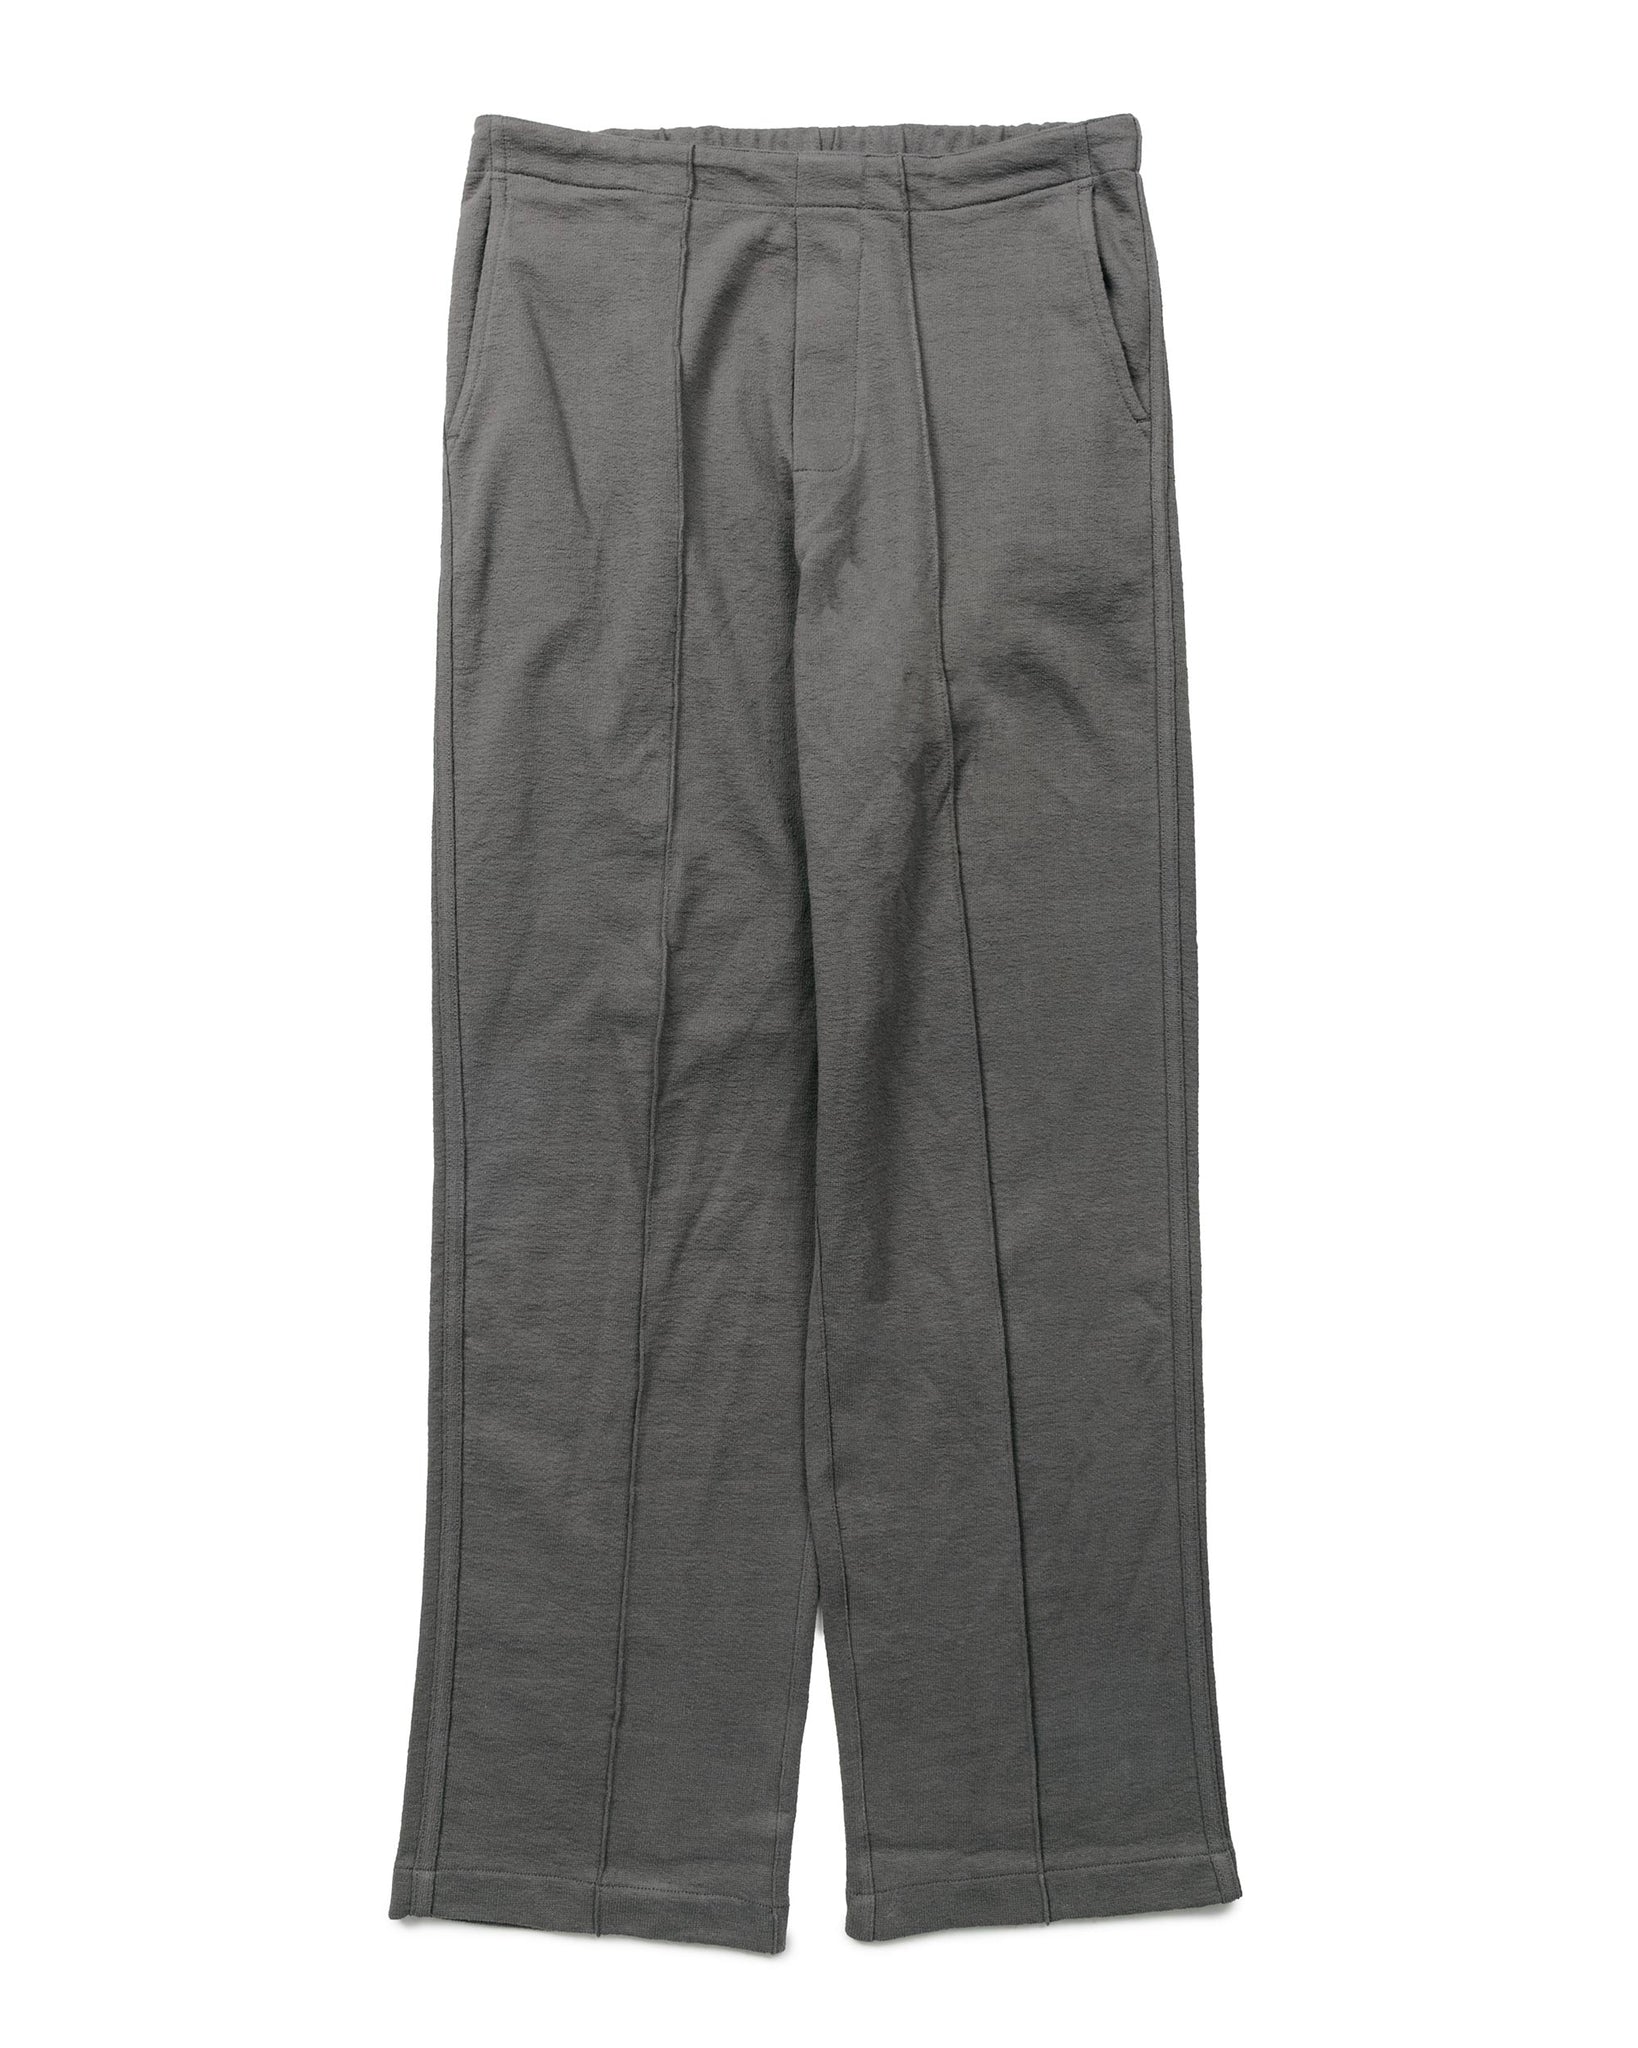 Lady White Co. Textured Band Pant Solid Grey